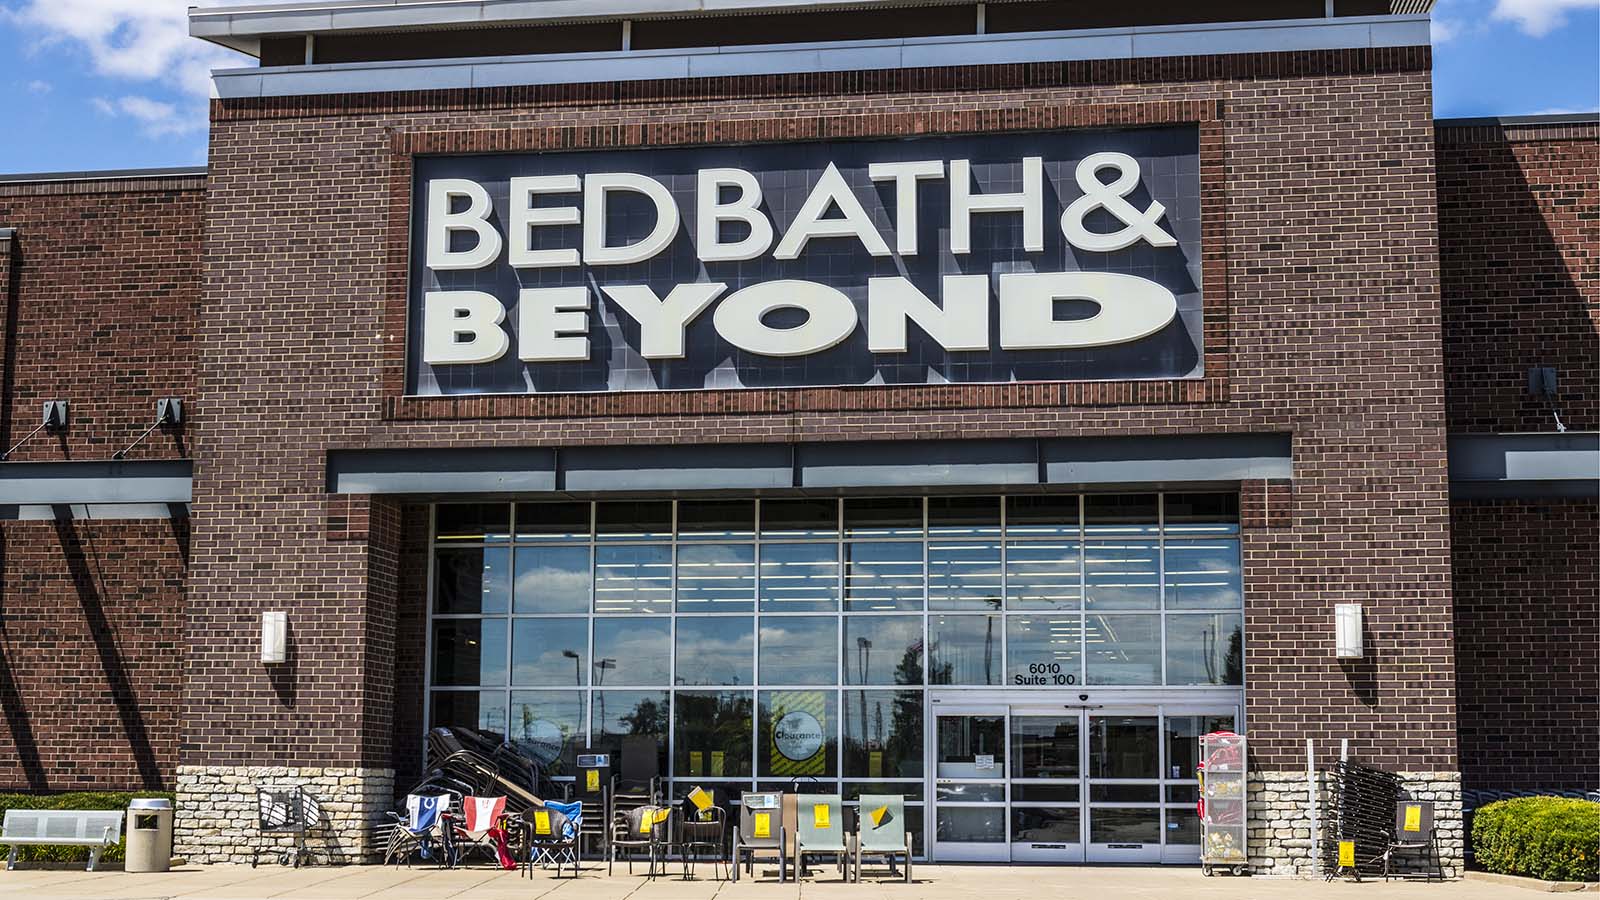 The front view of a Bed Bath & Beyond (BBBY) retail location in Indianapolis, Indiana.